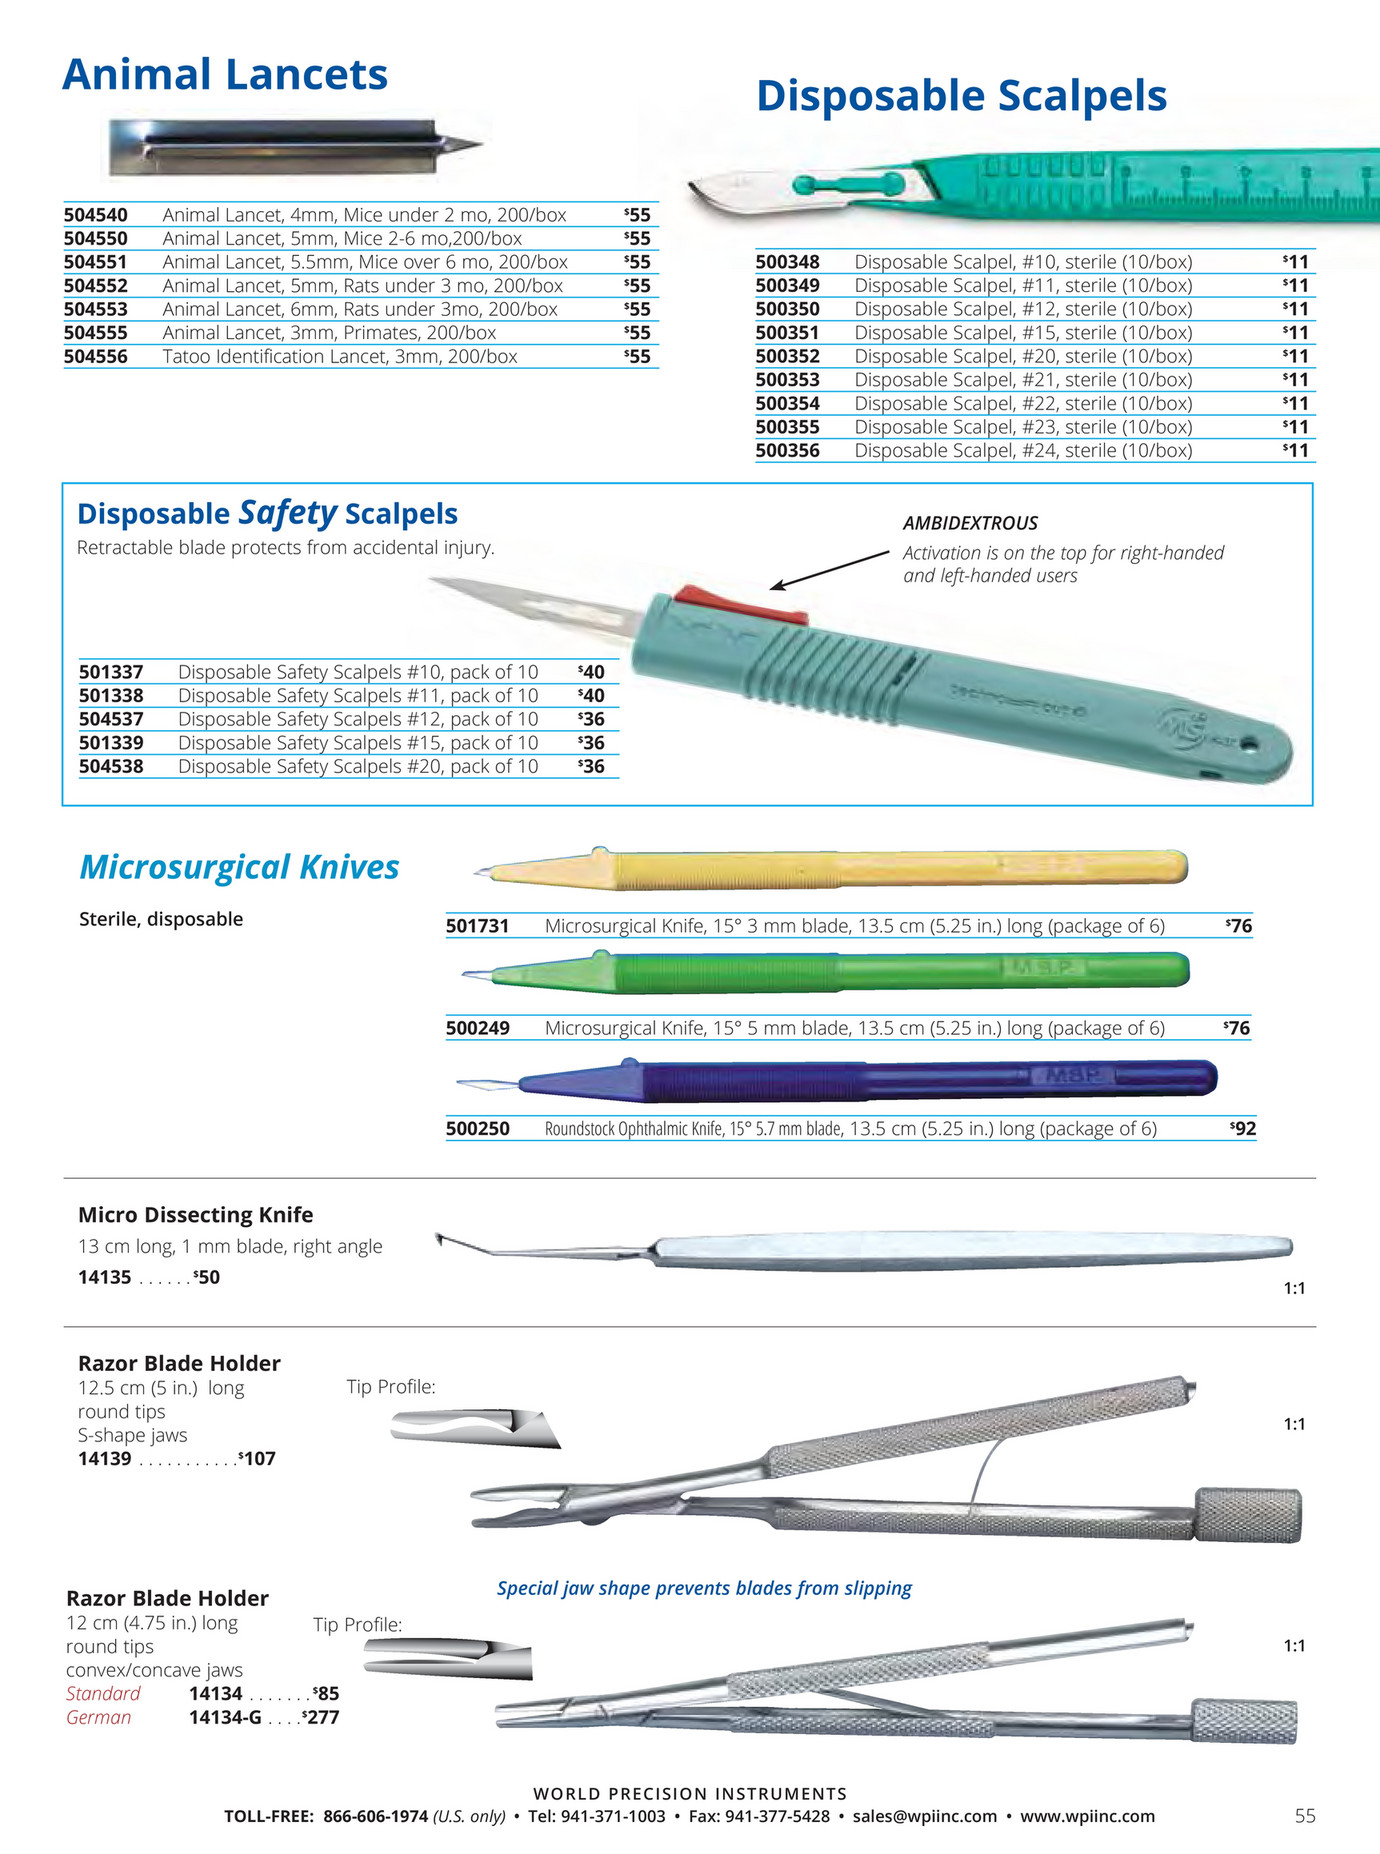 World Precision Instruments-Surgical Instrument Catalog - Page 54-55